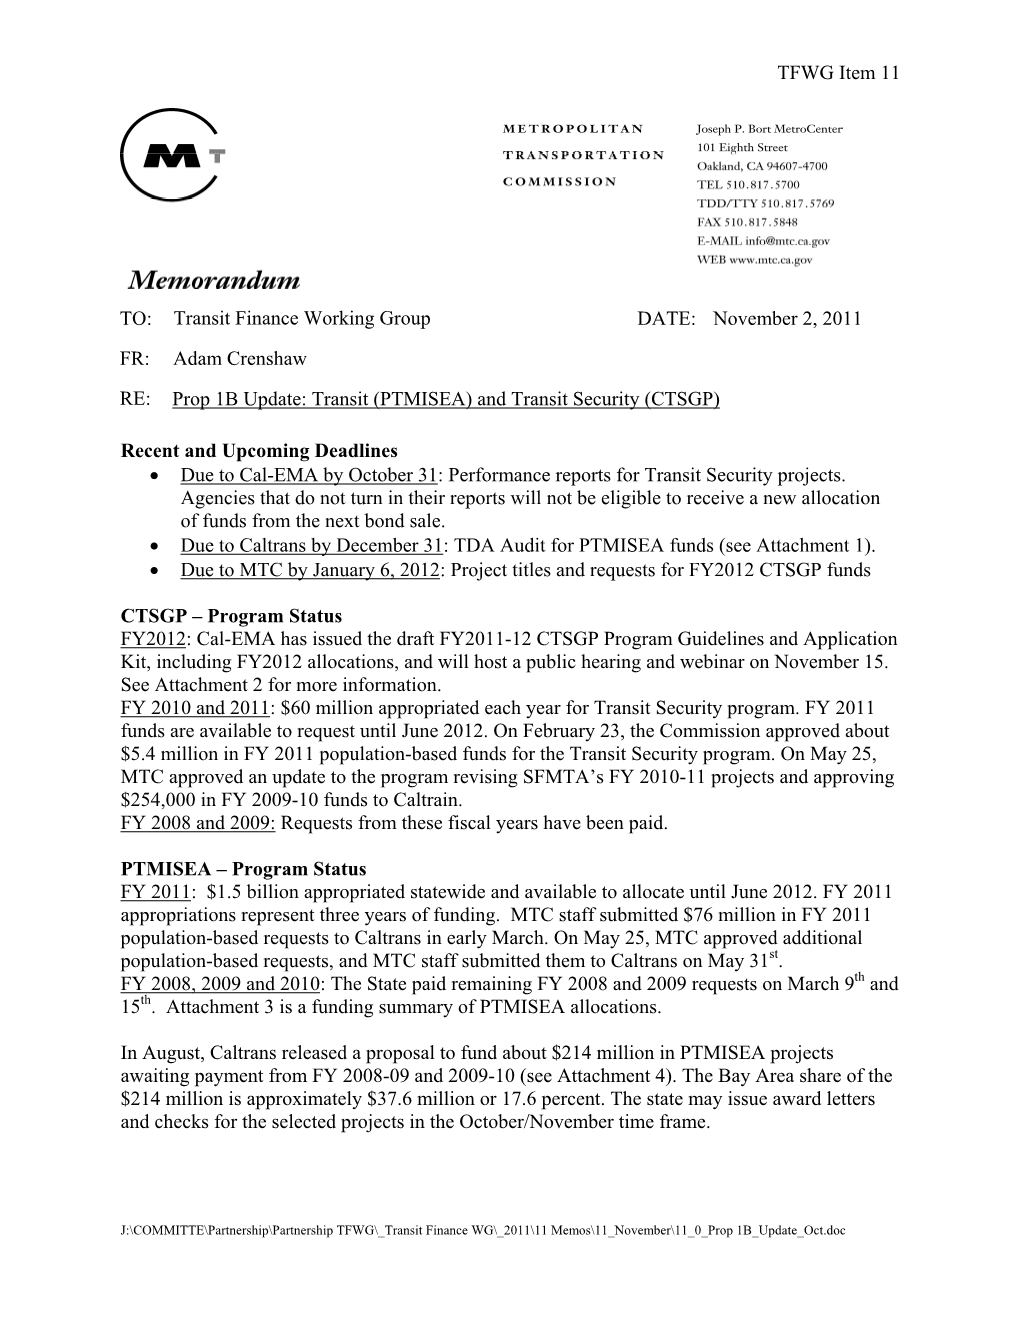 TFWG Item 11 TO: Transit Finance Working Group DATE: November